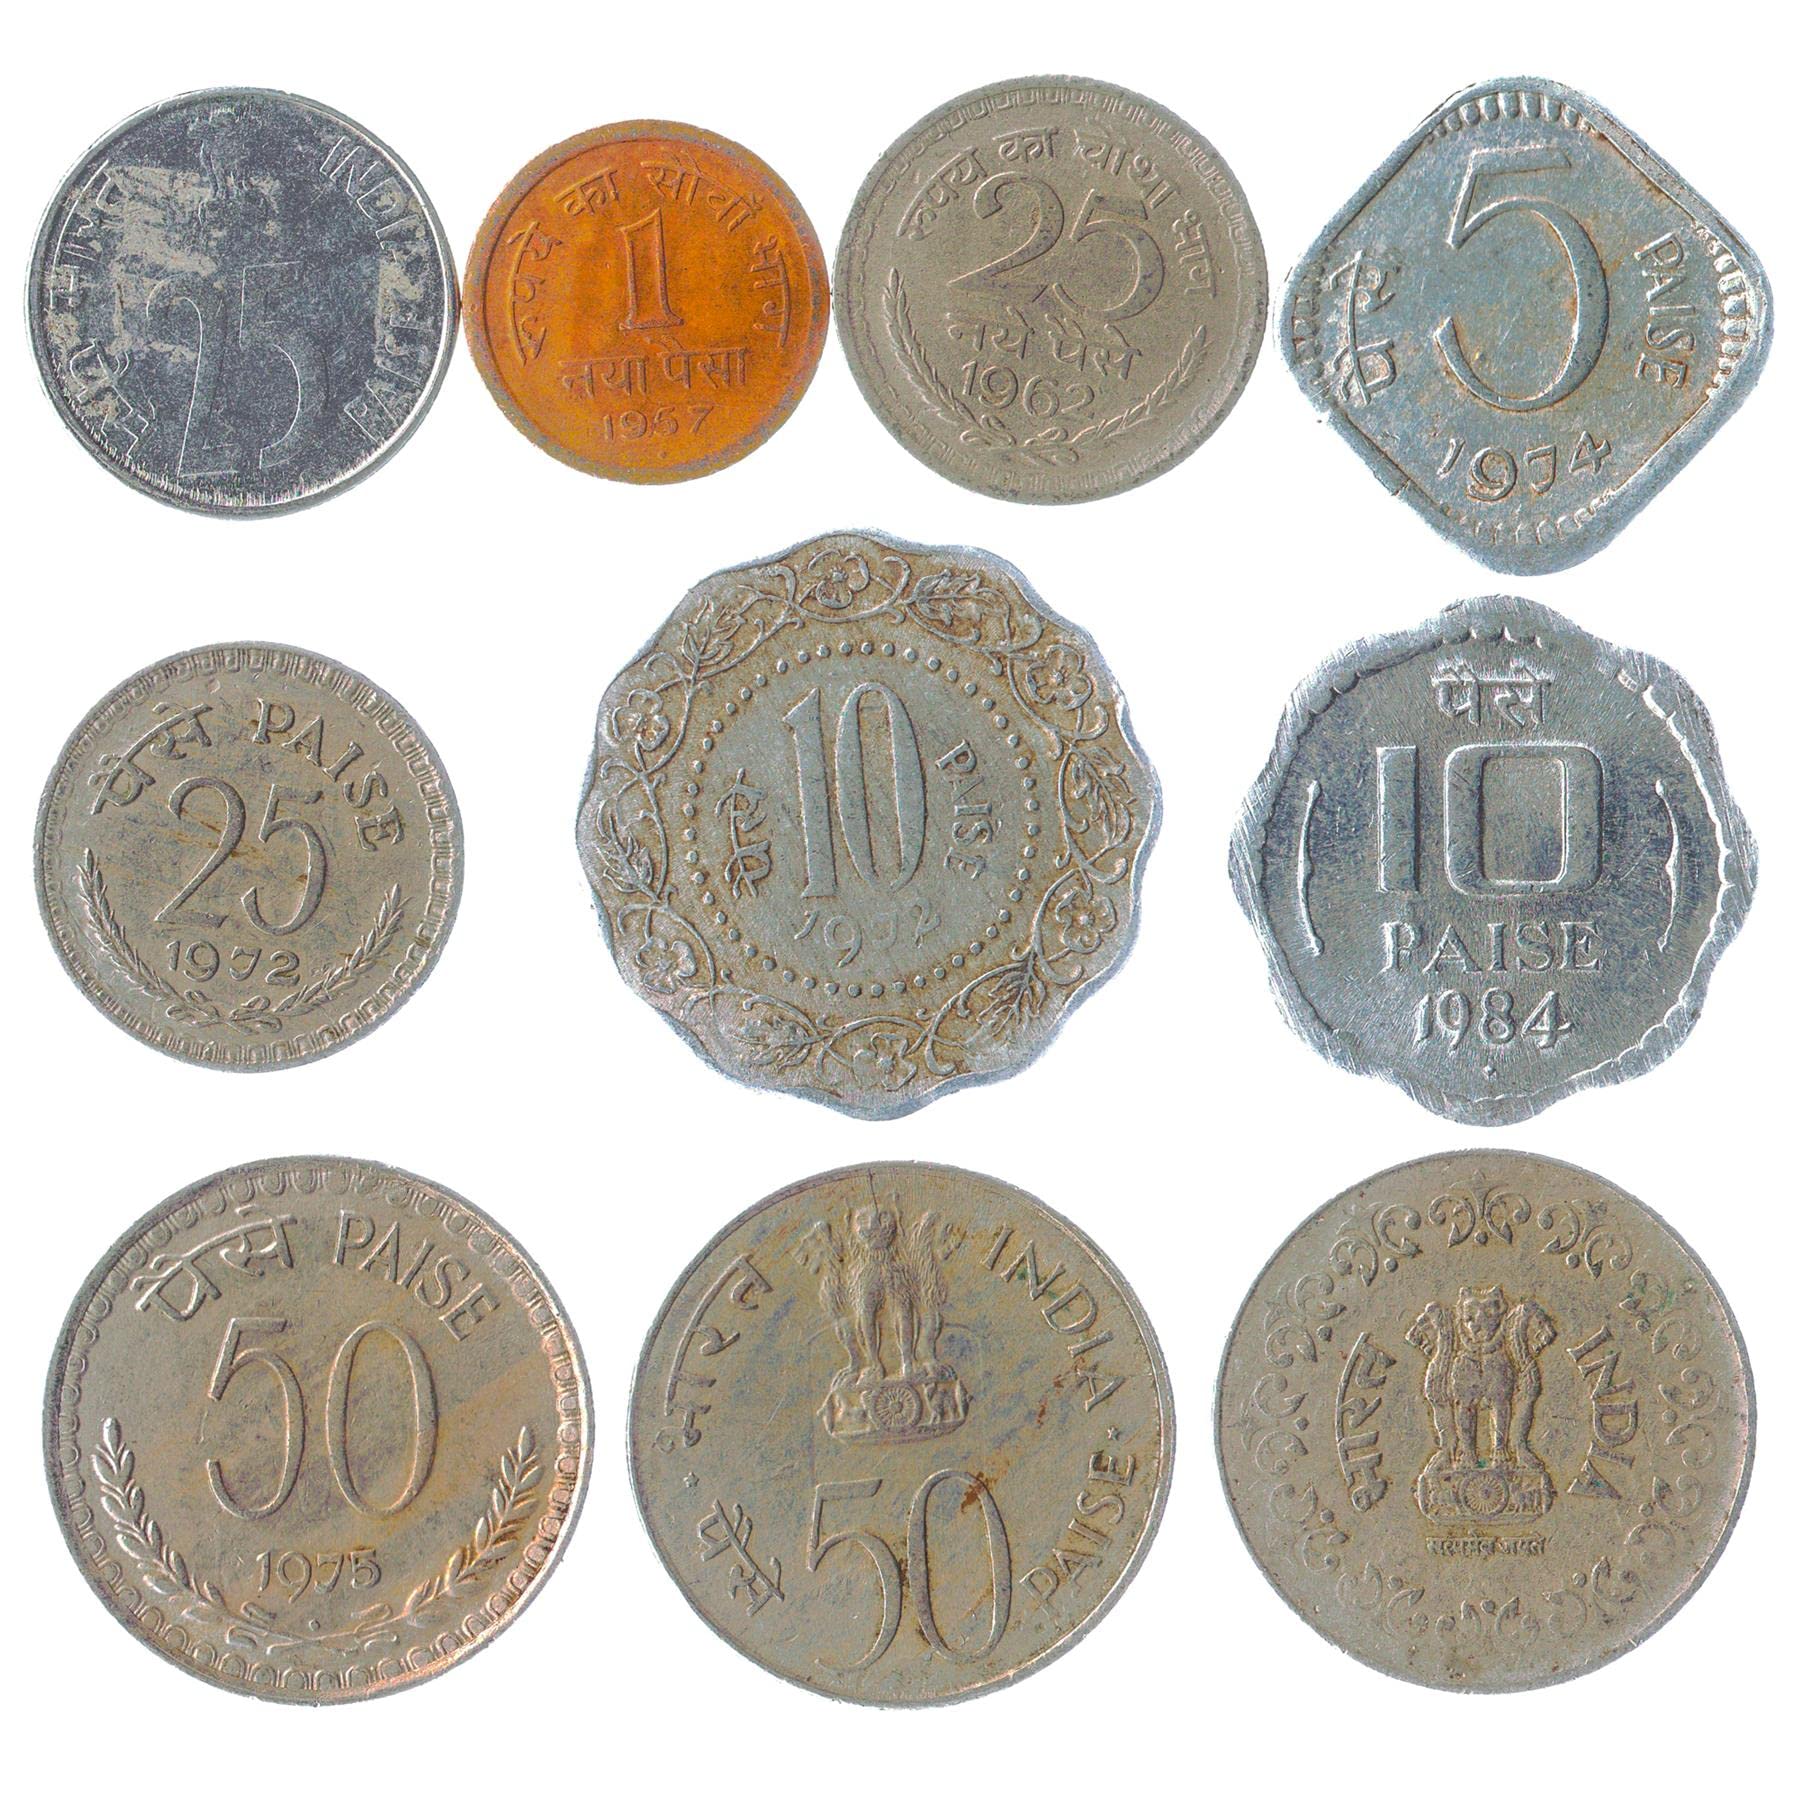 Indian Currency Coins Photos and Images & Pictures | Shutterstock